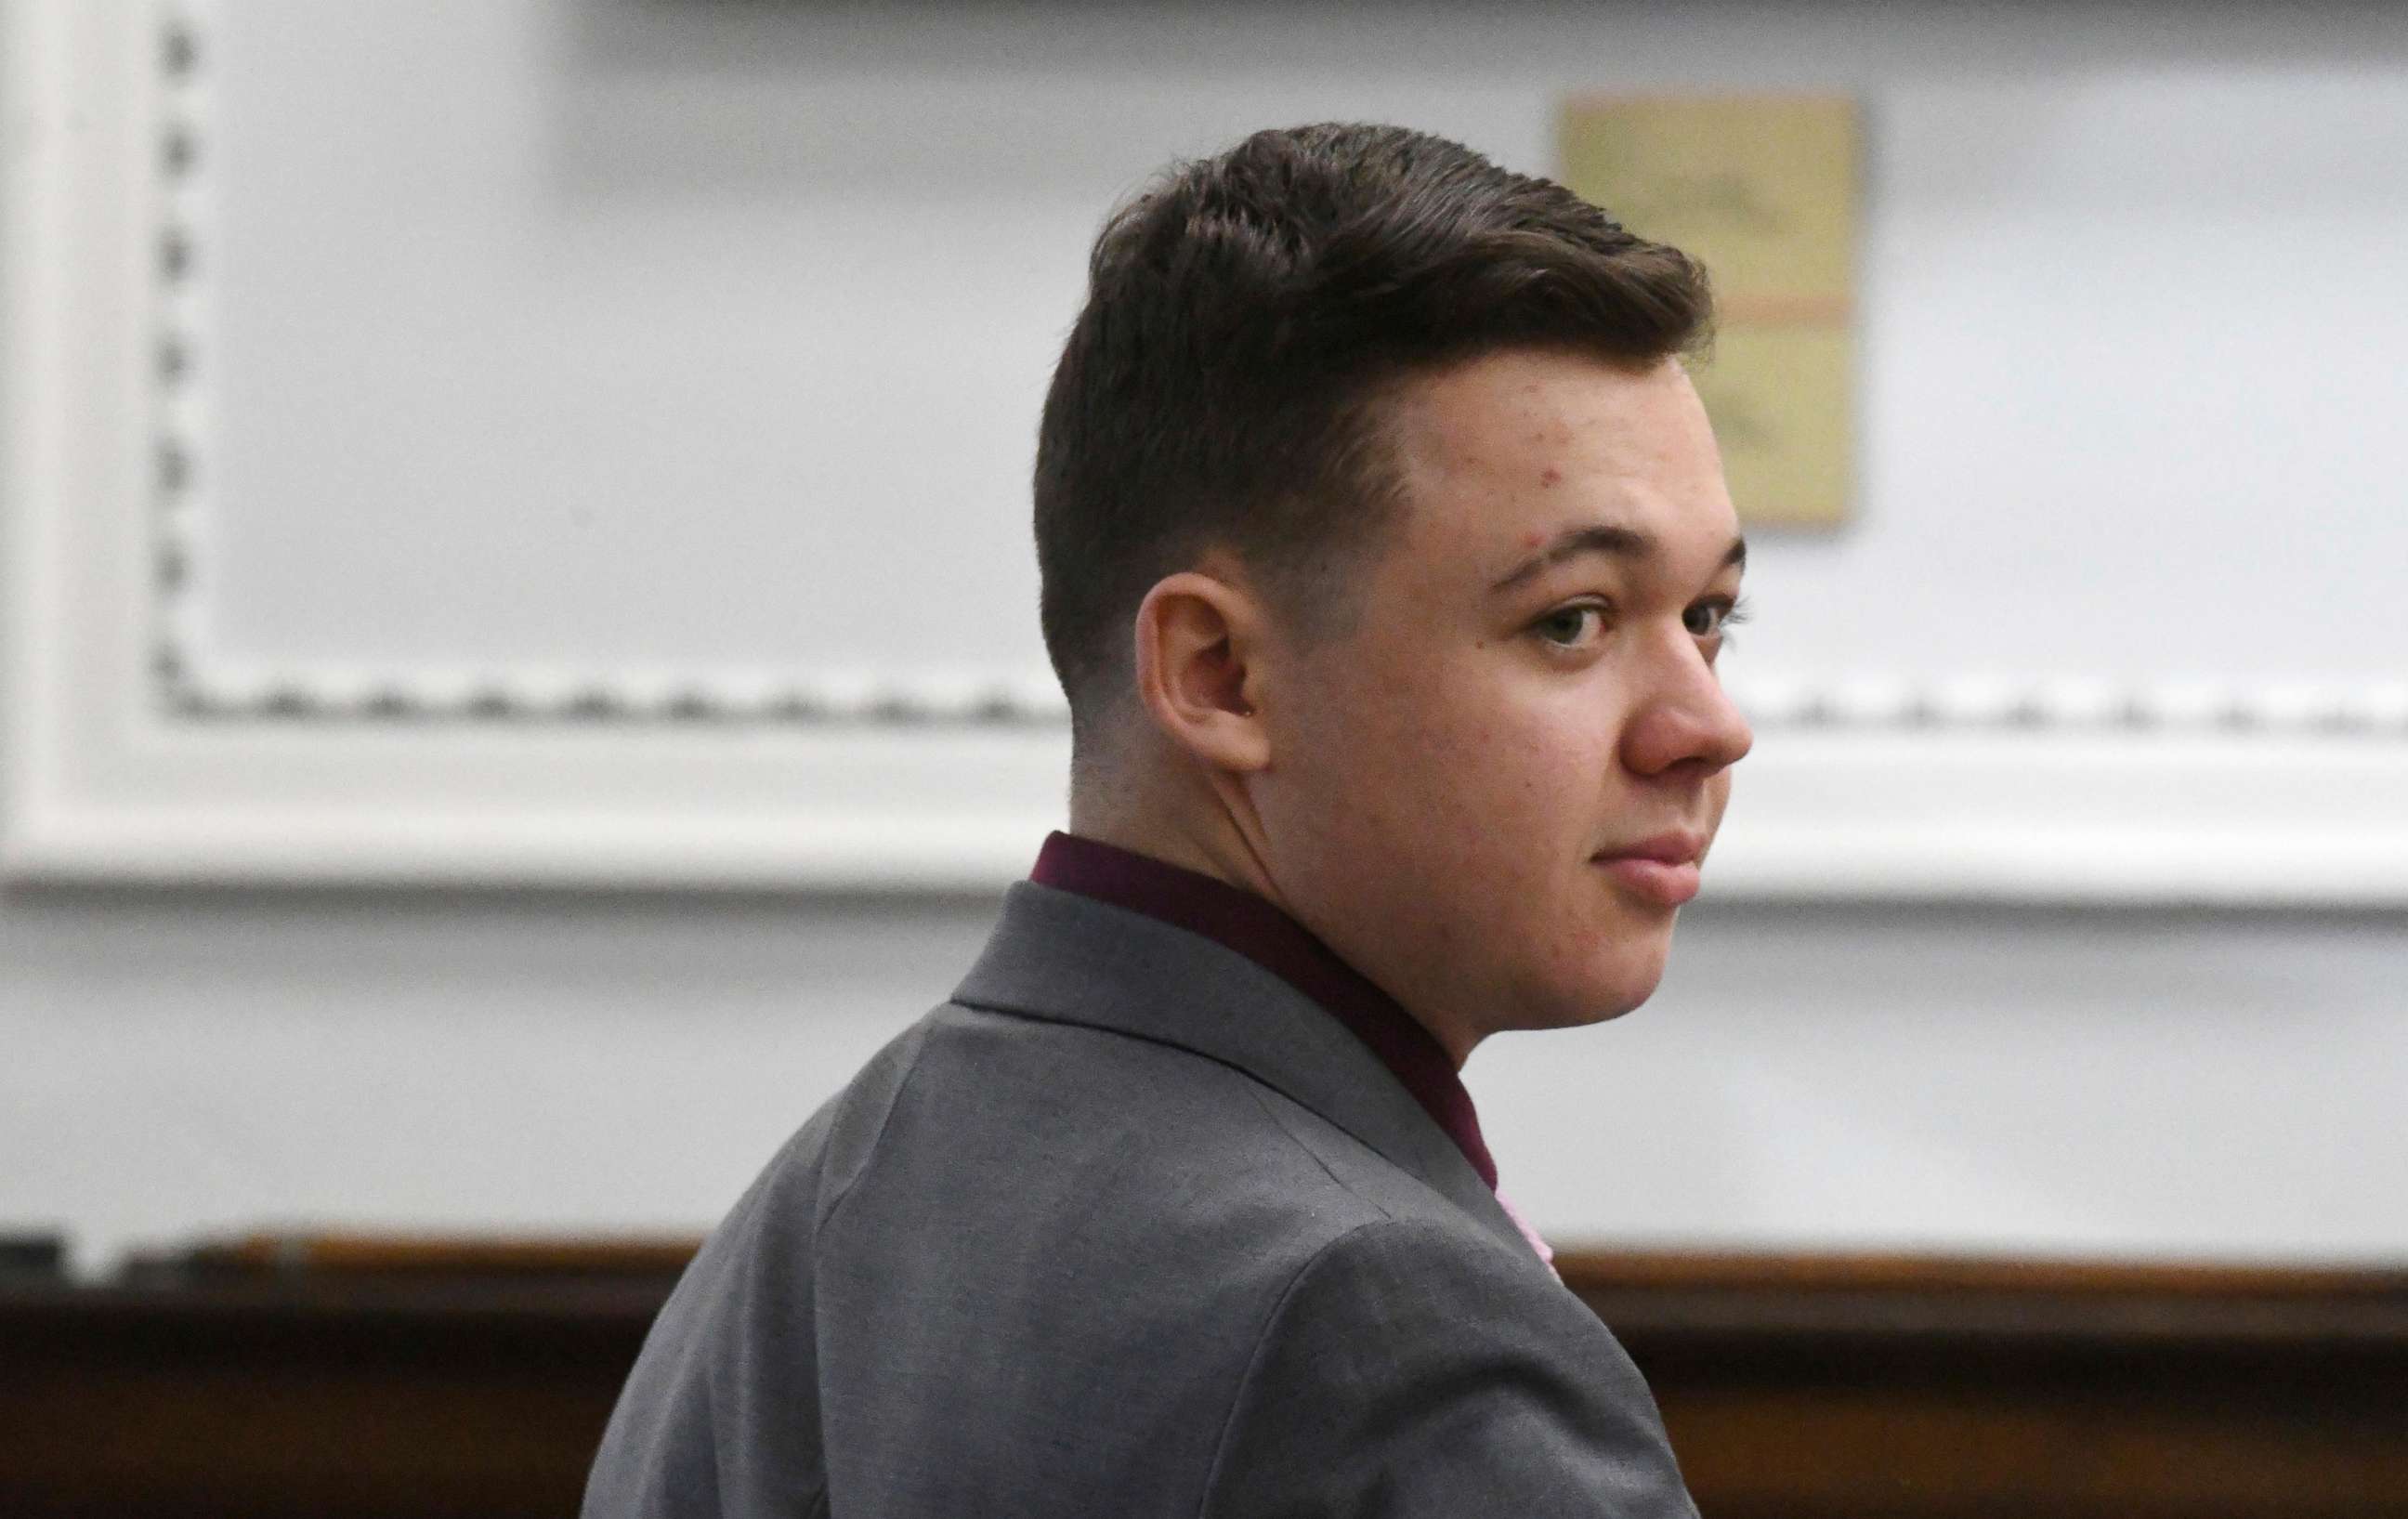 PHOTO: Kyle Rittenhouse waits for the start of his trial at the Kenosha County Courthouse in Kenosha, Wis., Nov. 9, 2021.